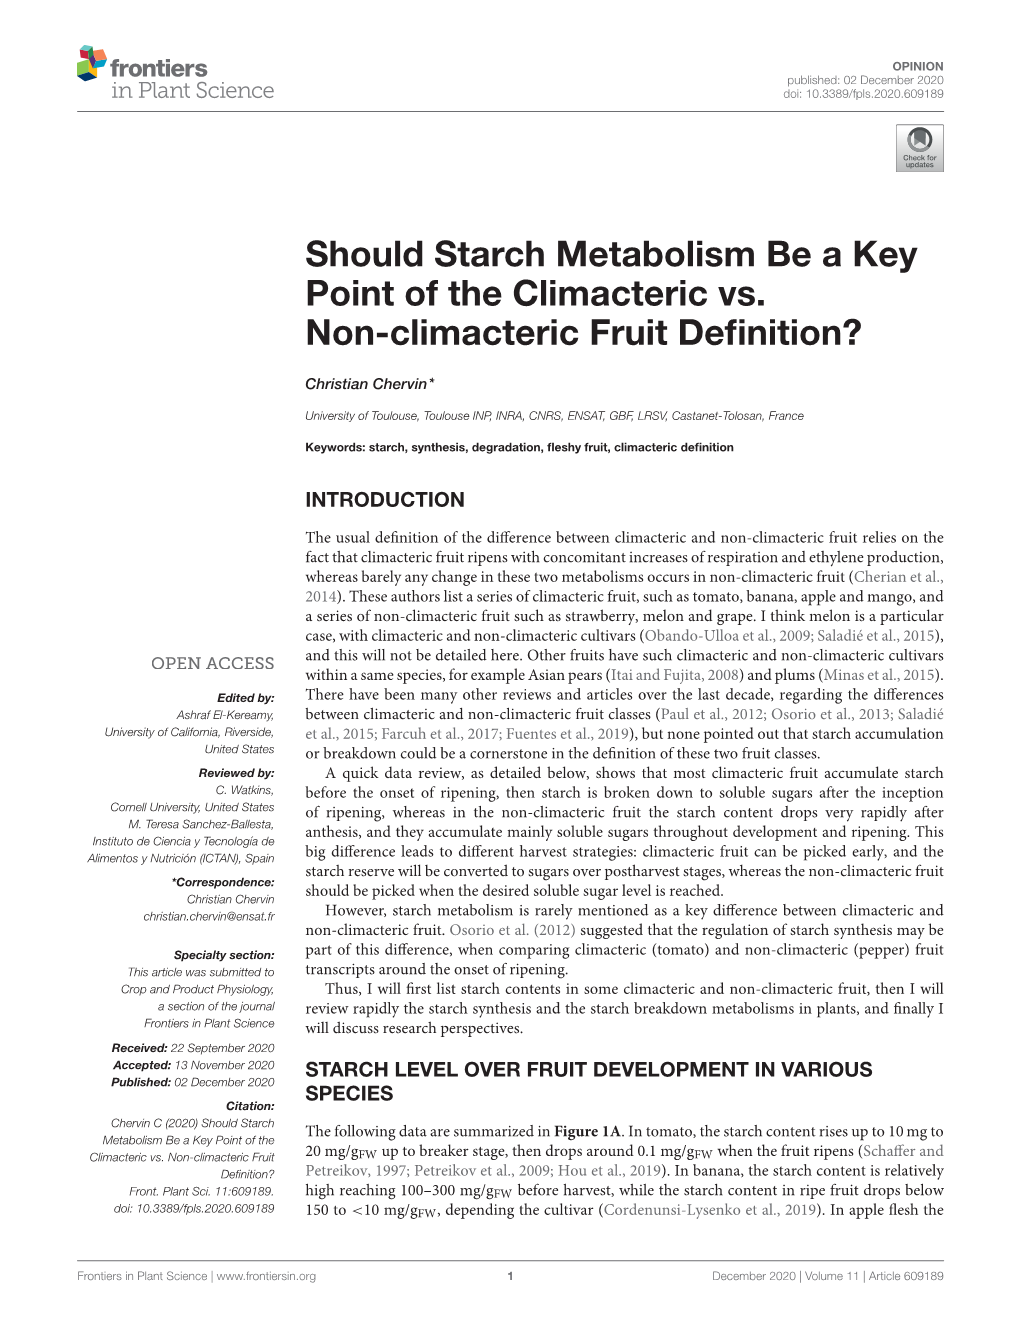 Should Starch Metabolism Be a Key Point of the Climacteric Vs. Non-Climacteric Fruit Deﬁnition?